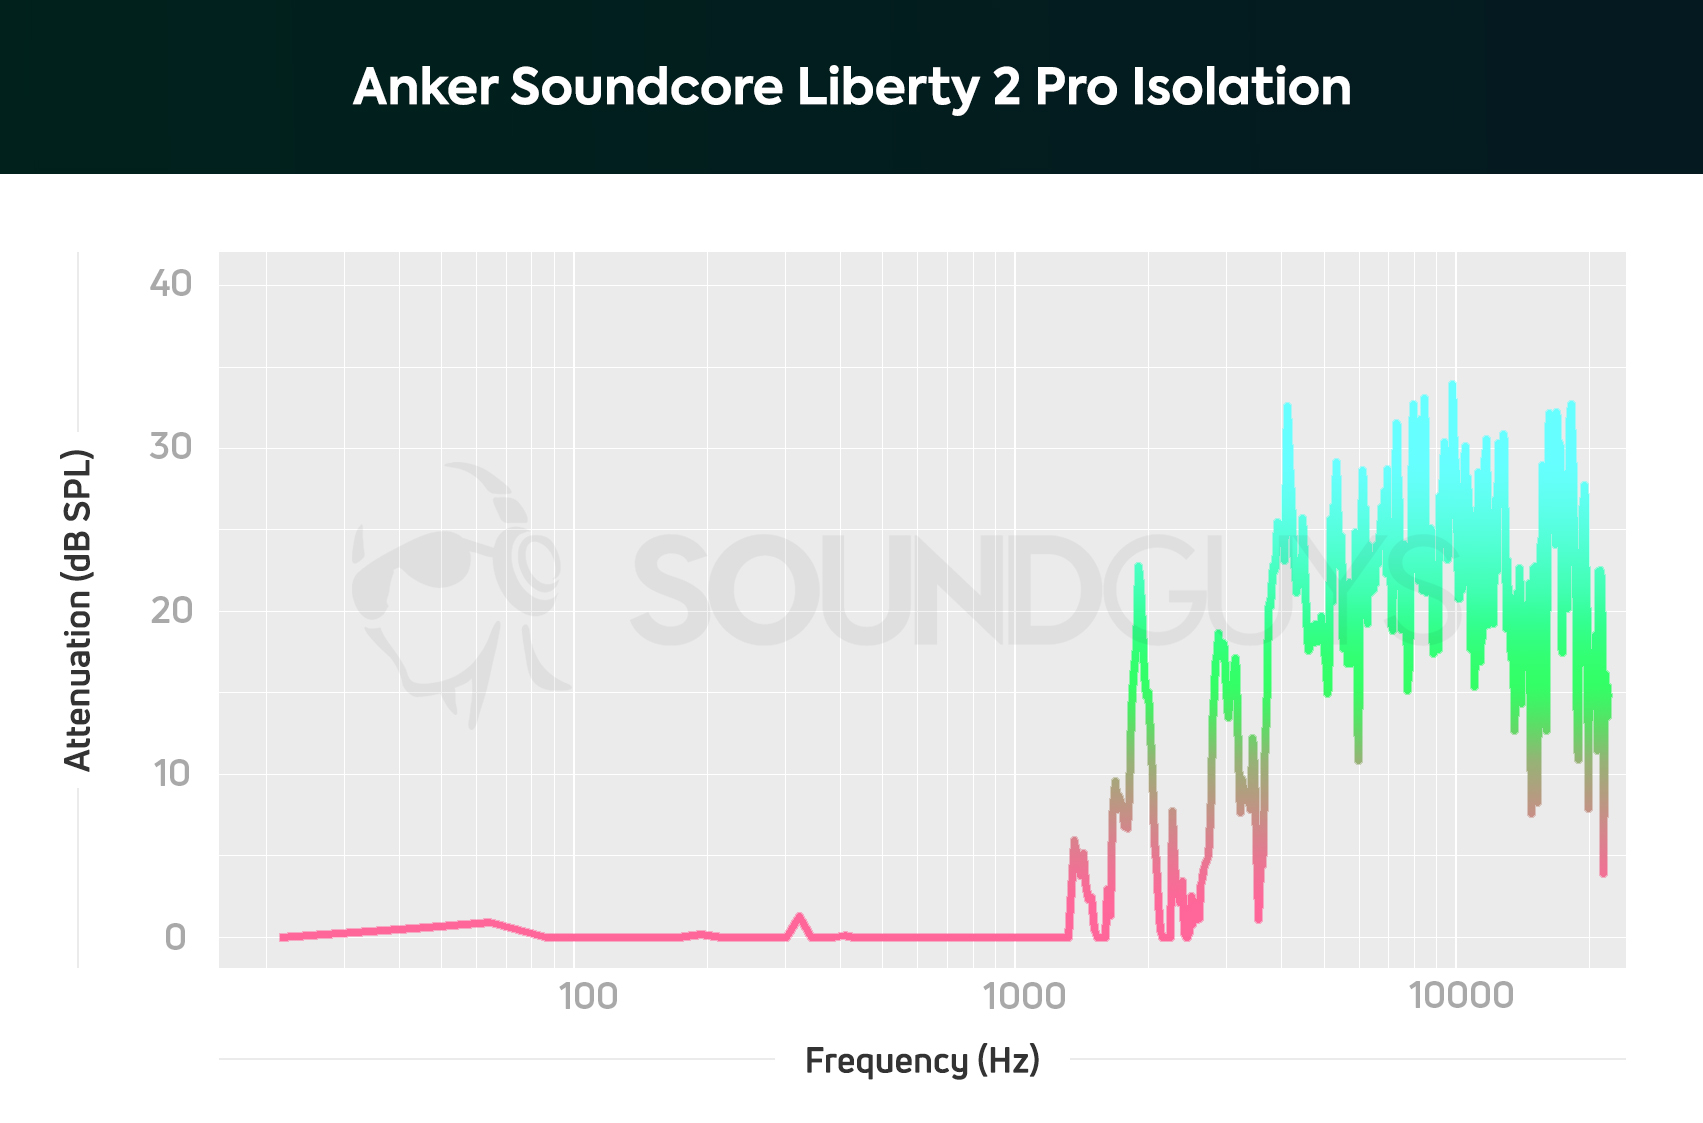 Anker Soundcore Liberty 2 Pro isolation graph showing that these aren't good at all at blocking outside sound for anything under 1000Hz.